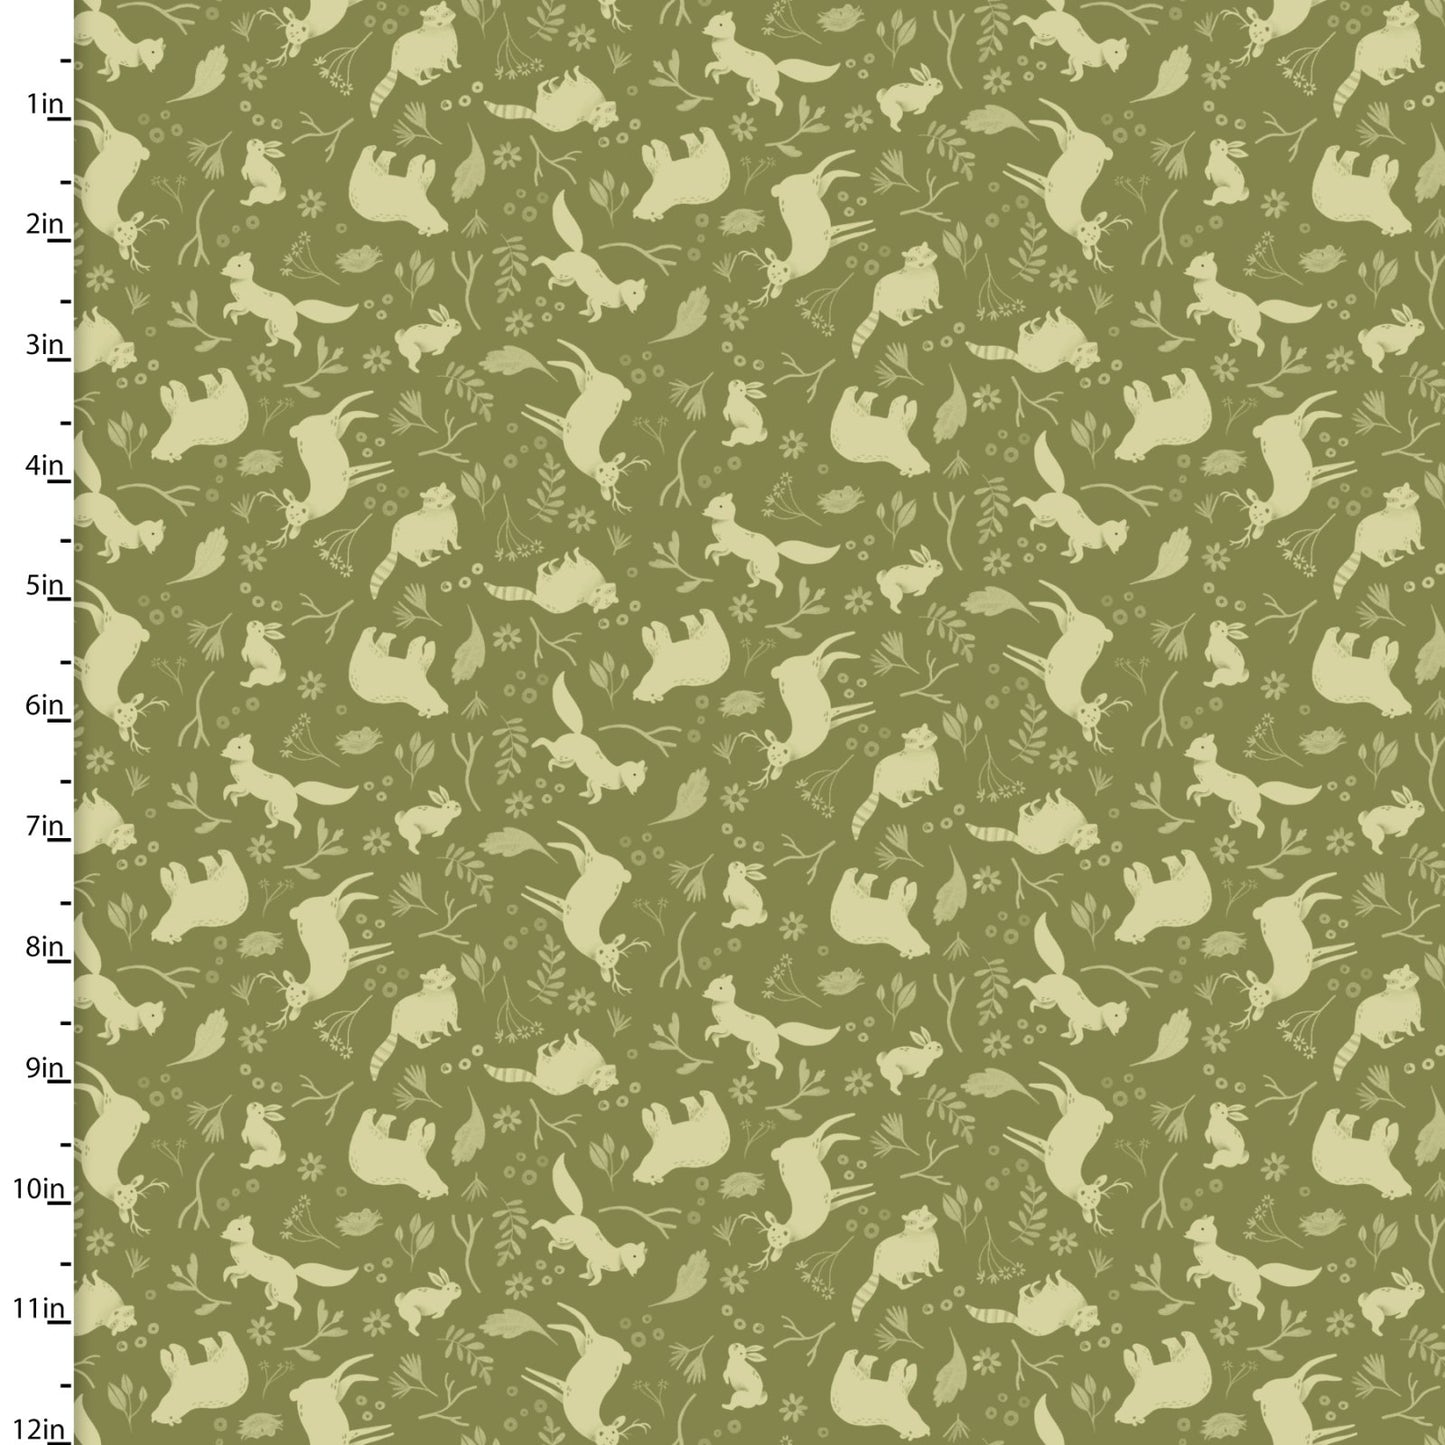 3 Wishes Fabric - Cozy Forest - Green